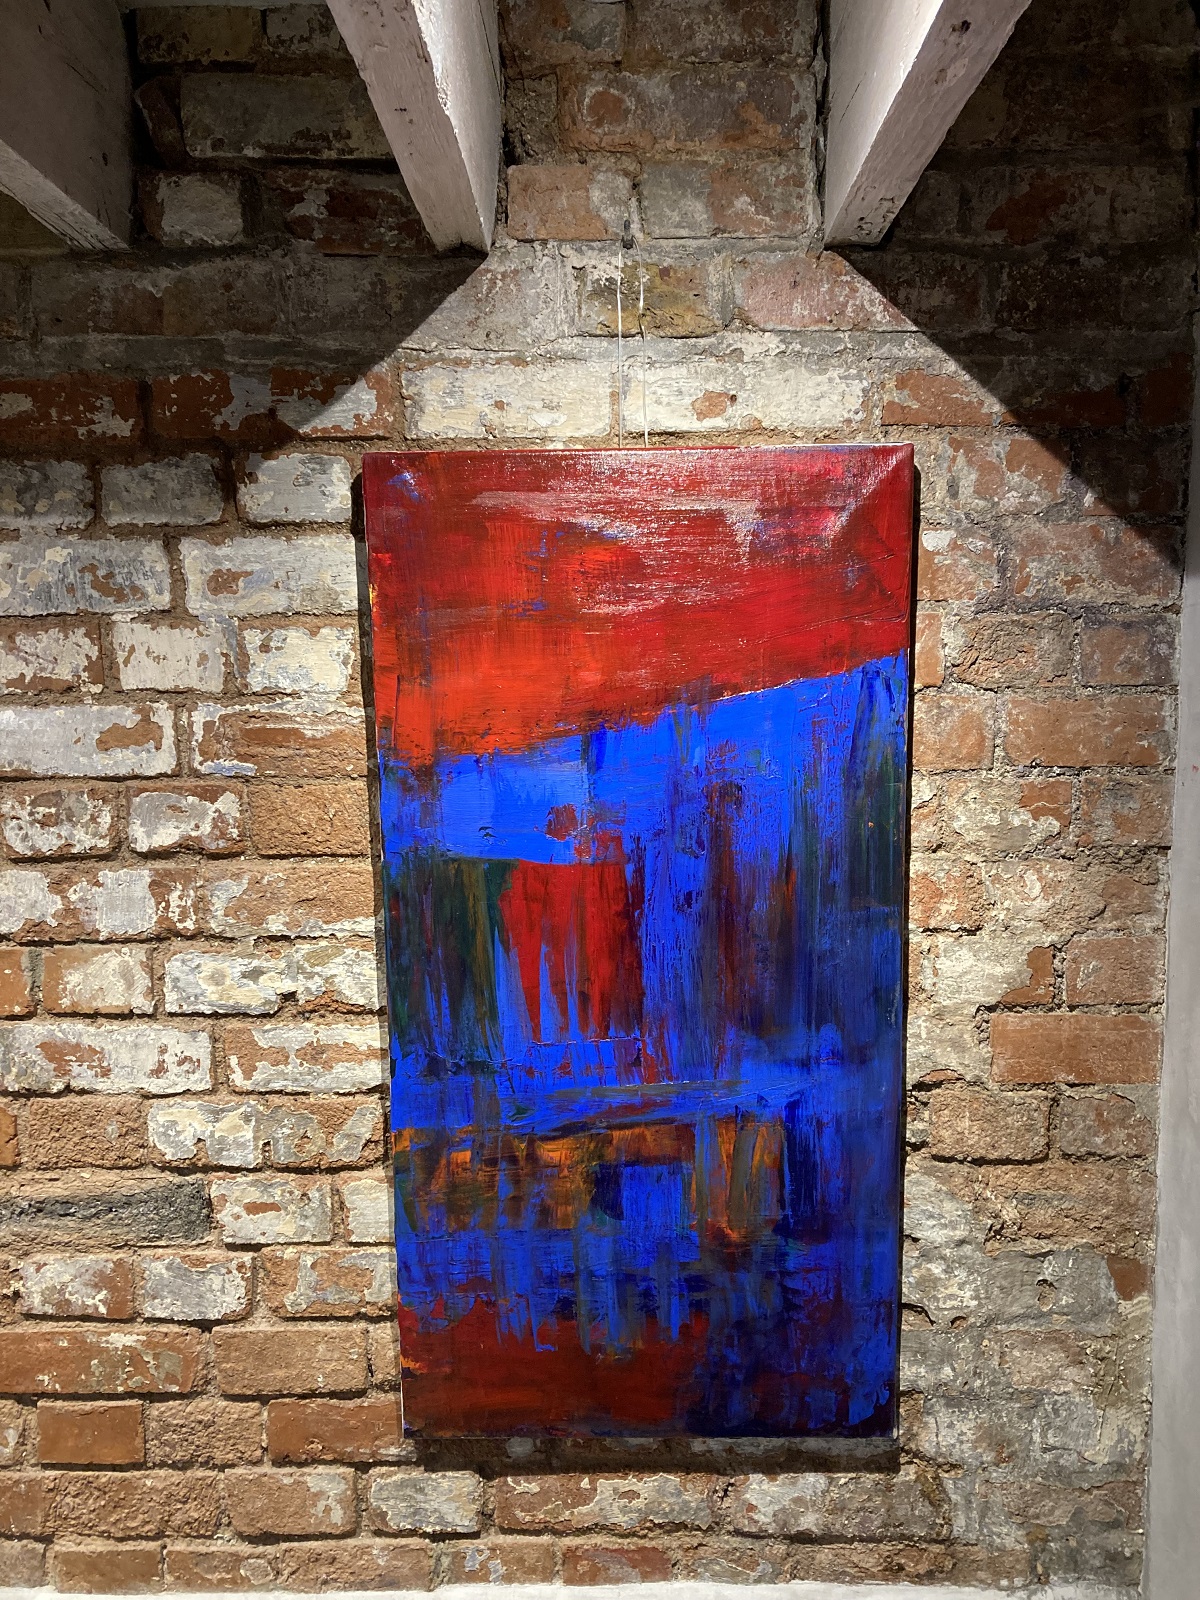 strong colours in art work by Frances Bildner brighten up a brick wall